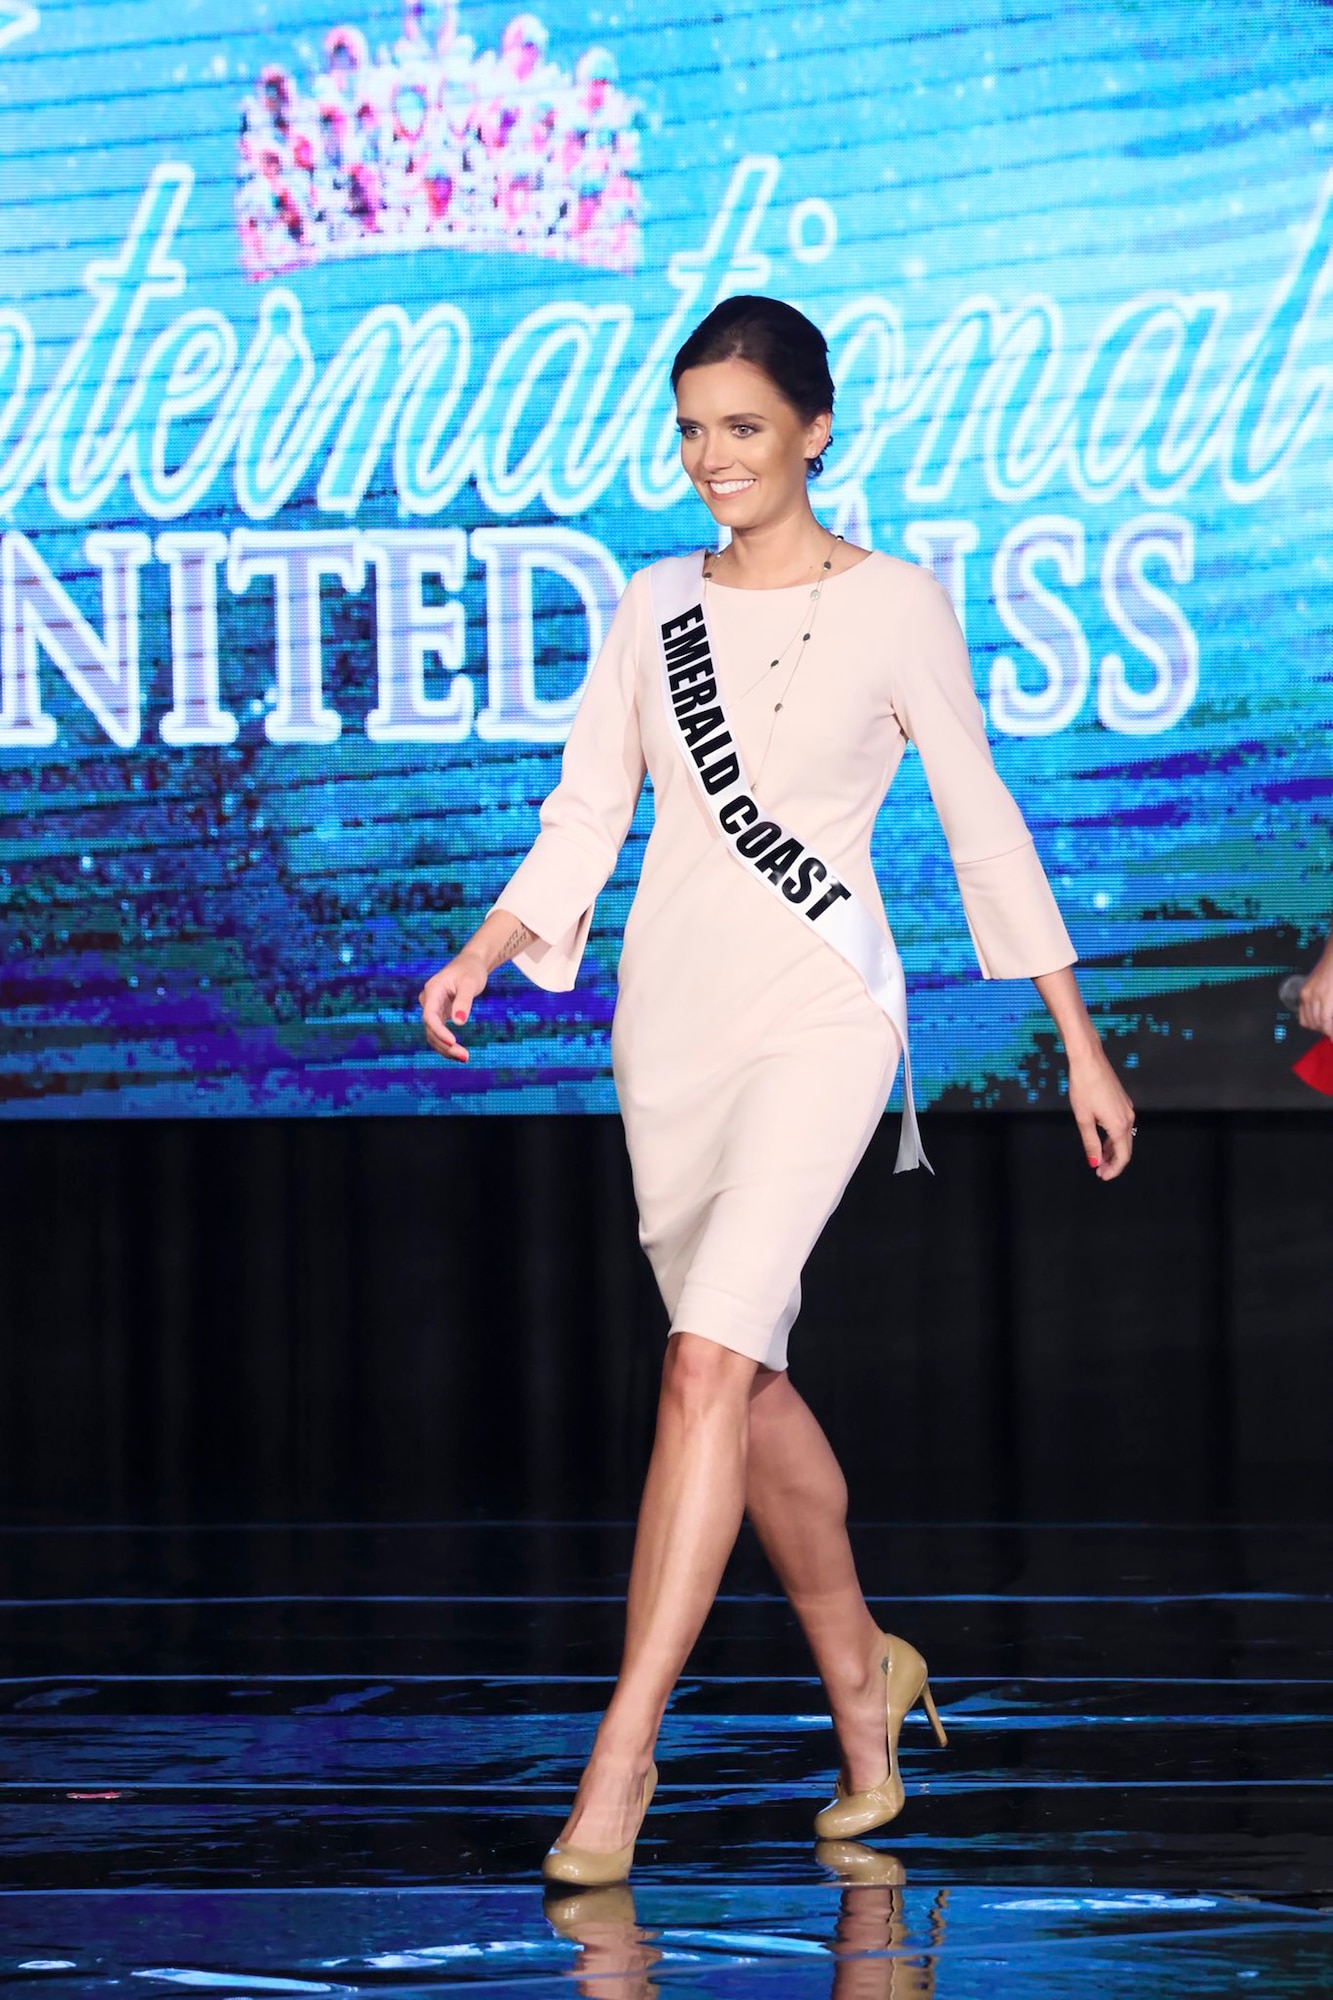 Maj. Samantha Burrill Westman, 28th Intelligence Squadron flight commander, Tactical Systems Operators (TSO) flight, had the opportunity to compete during the February 2021 International United Miss Florida State pageant. From there, she qualified in July to compete at the 2021 Nationals in New Jersey as National United Ms. Emerald Coast.